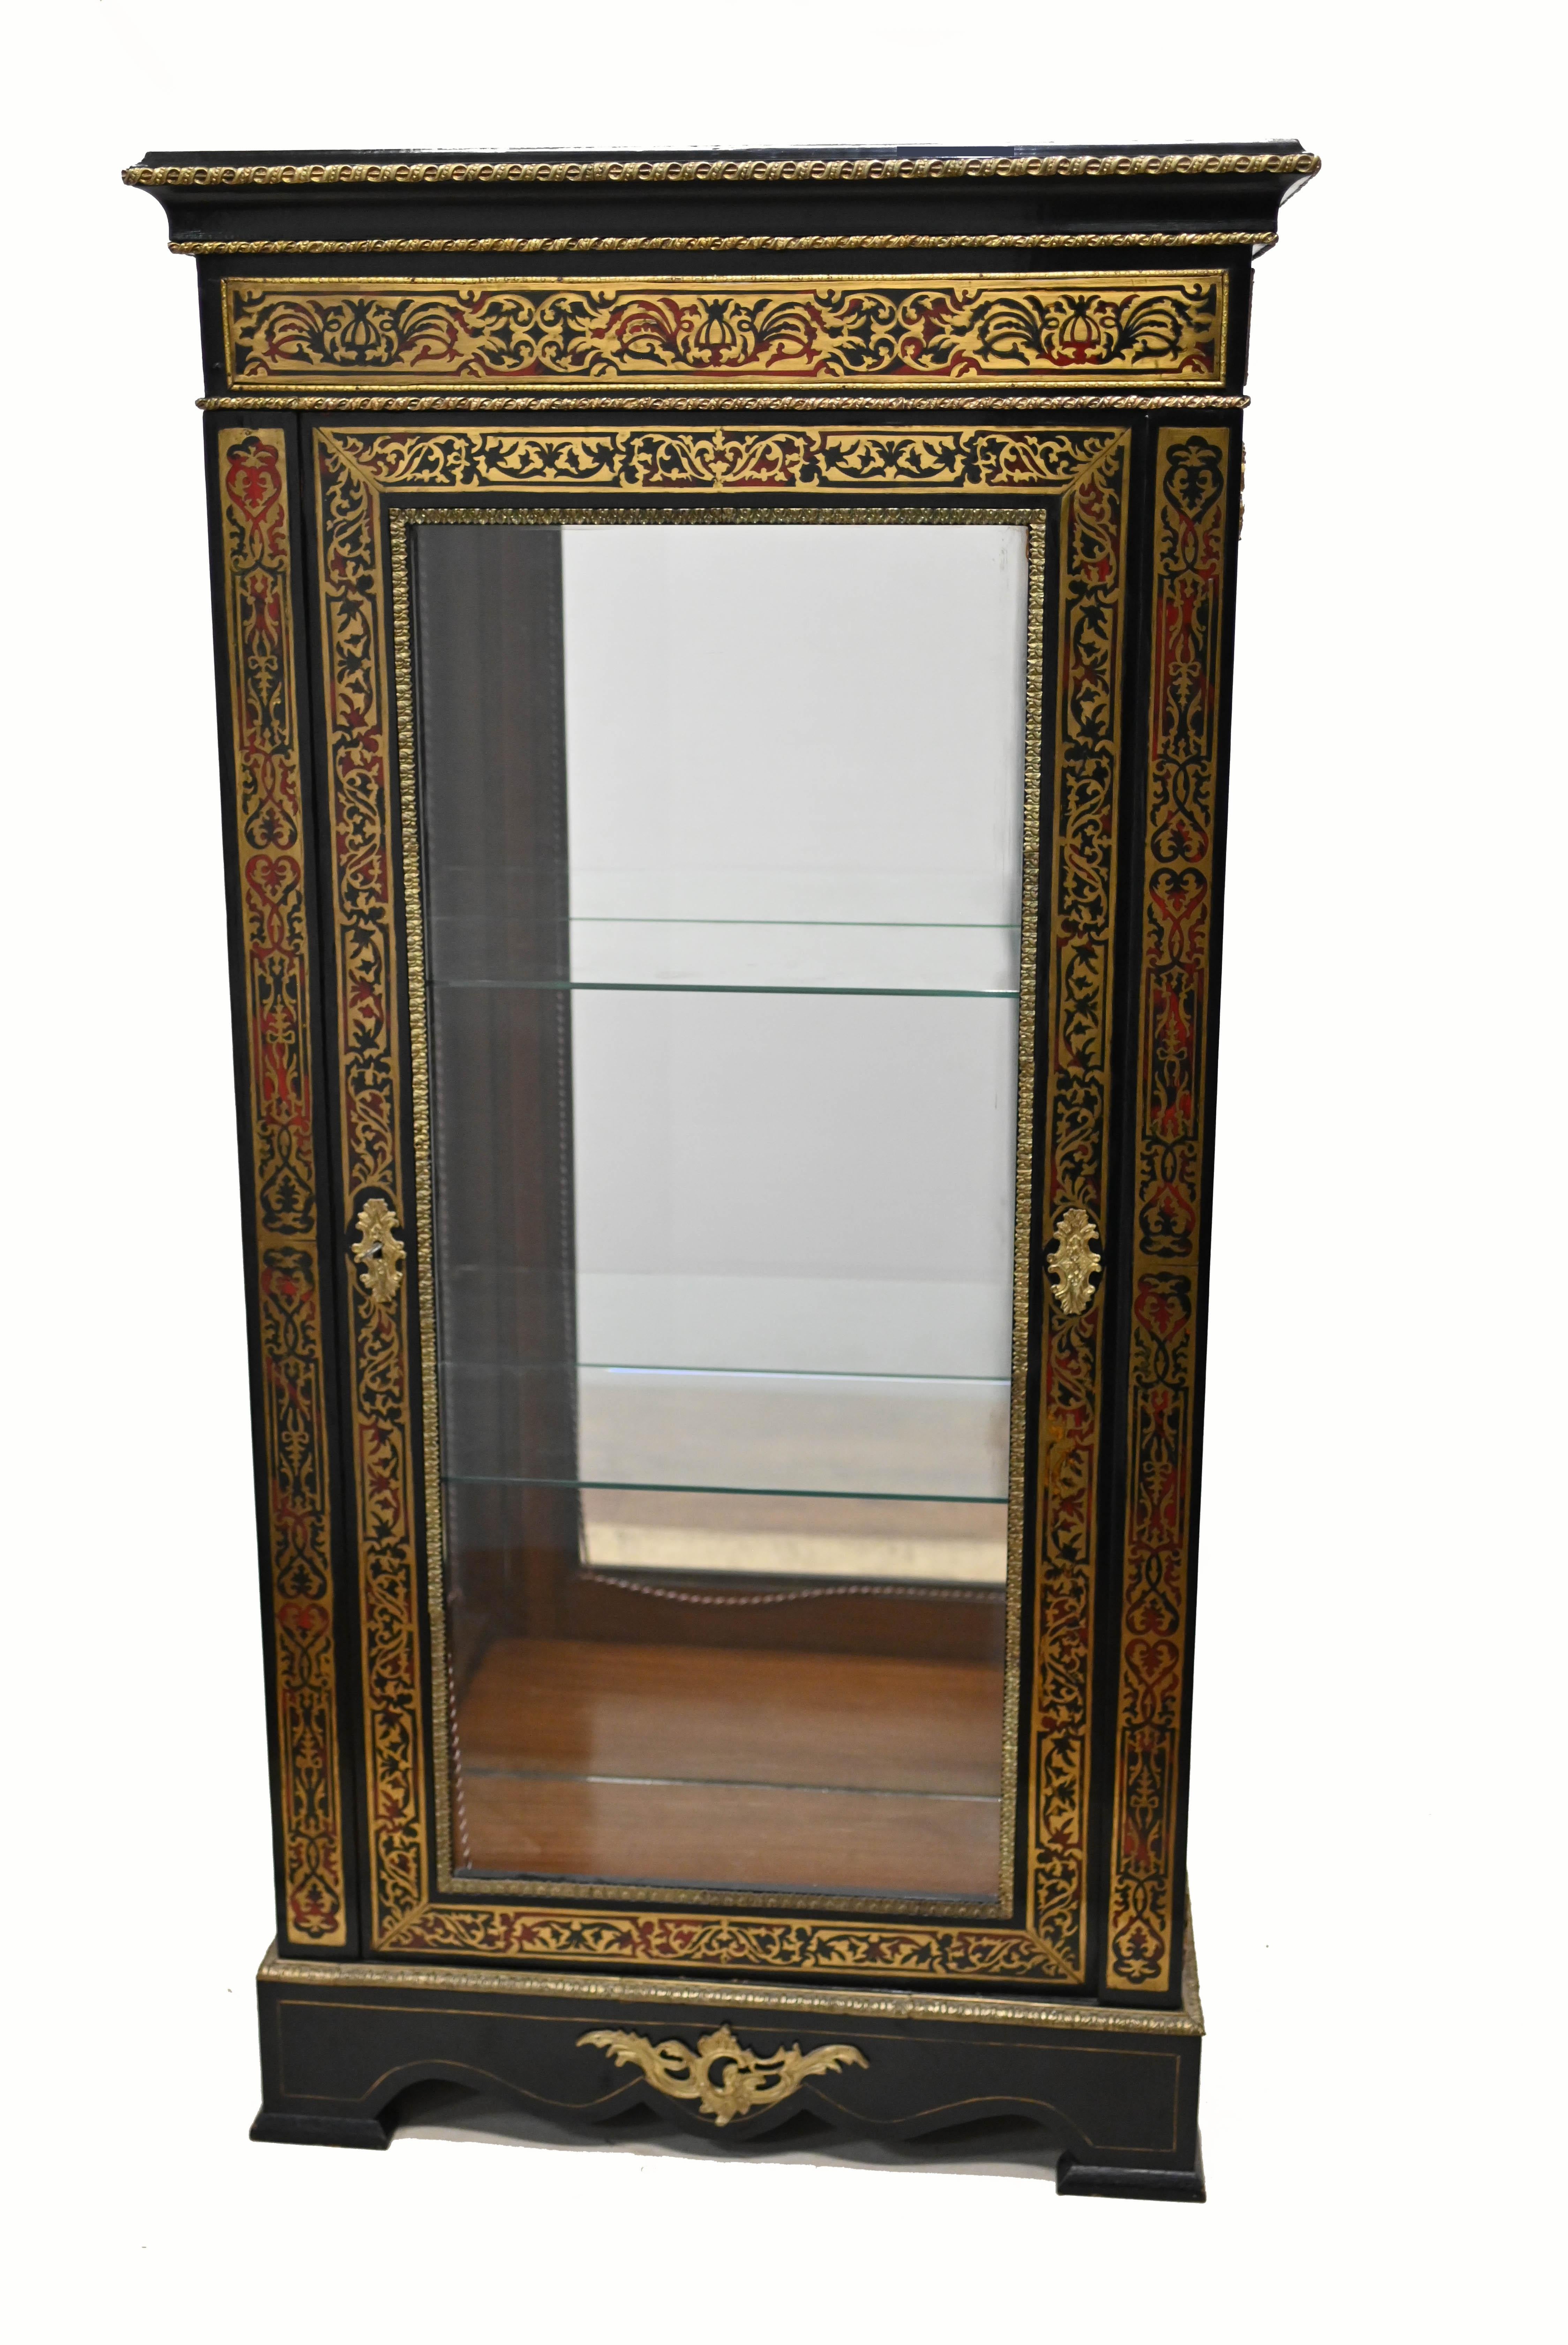 Elegant French display cabinet in the Boulle manner
Features the distinctive style of Boulle inlay with brass, ebony and faux tortoiseshell
Great look to this piece we bought from a dealer on Marche Biron at the Paris antiques markets
Opens out to